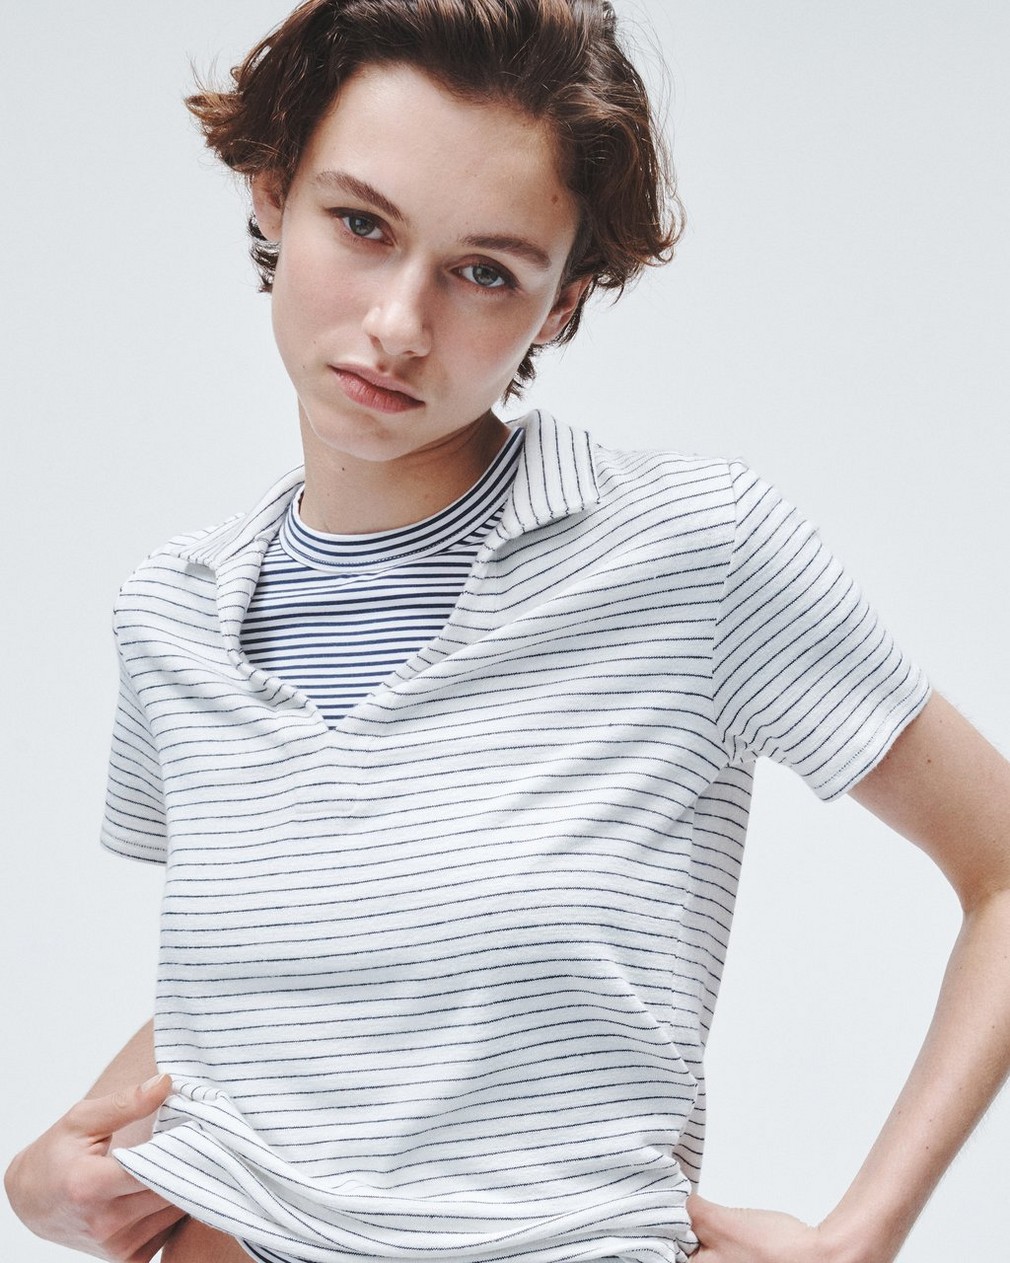 The Knit Striped Polo